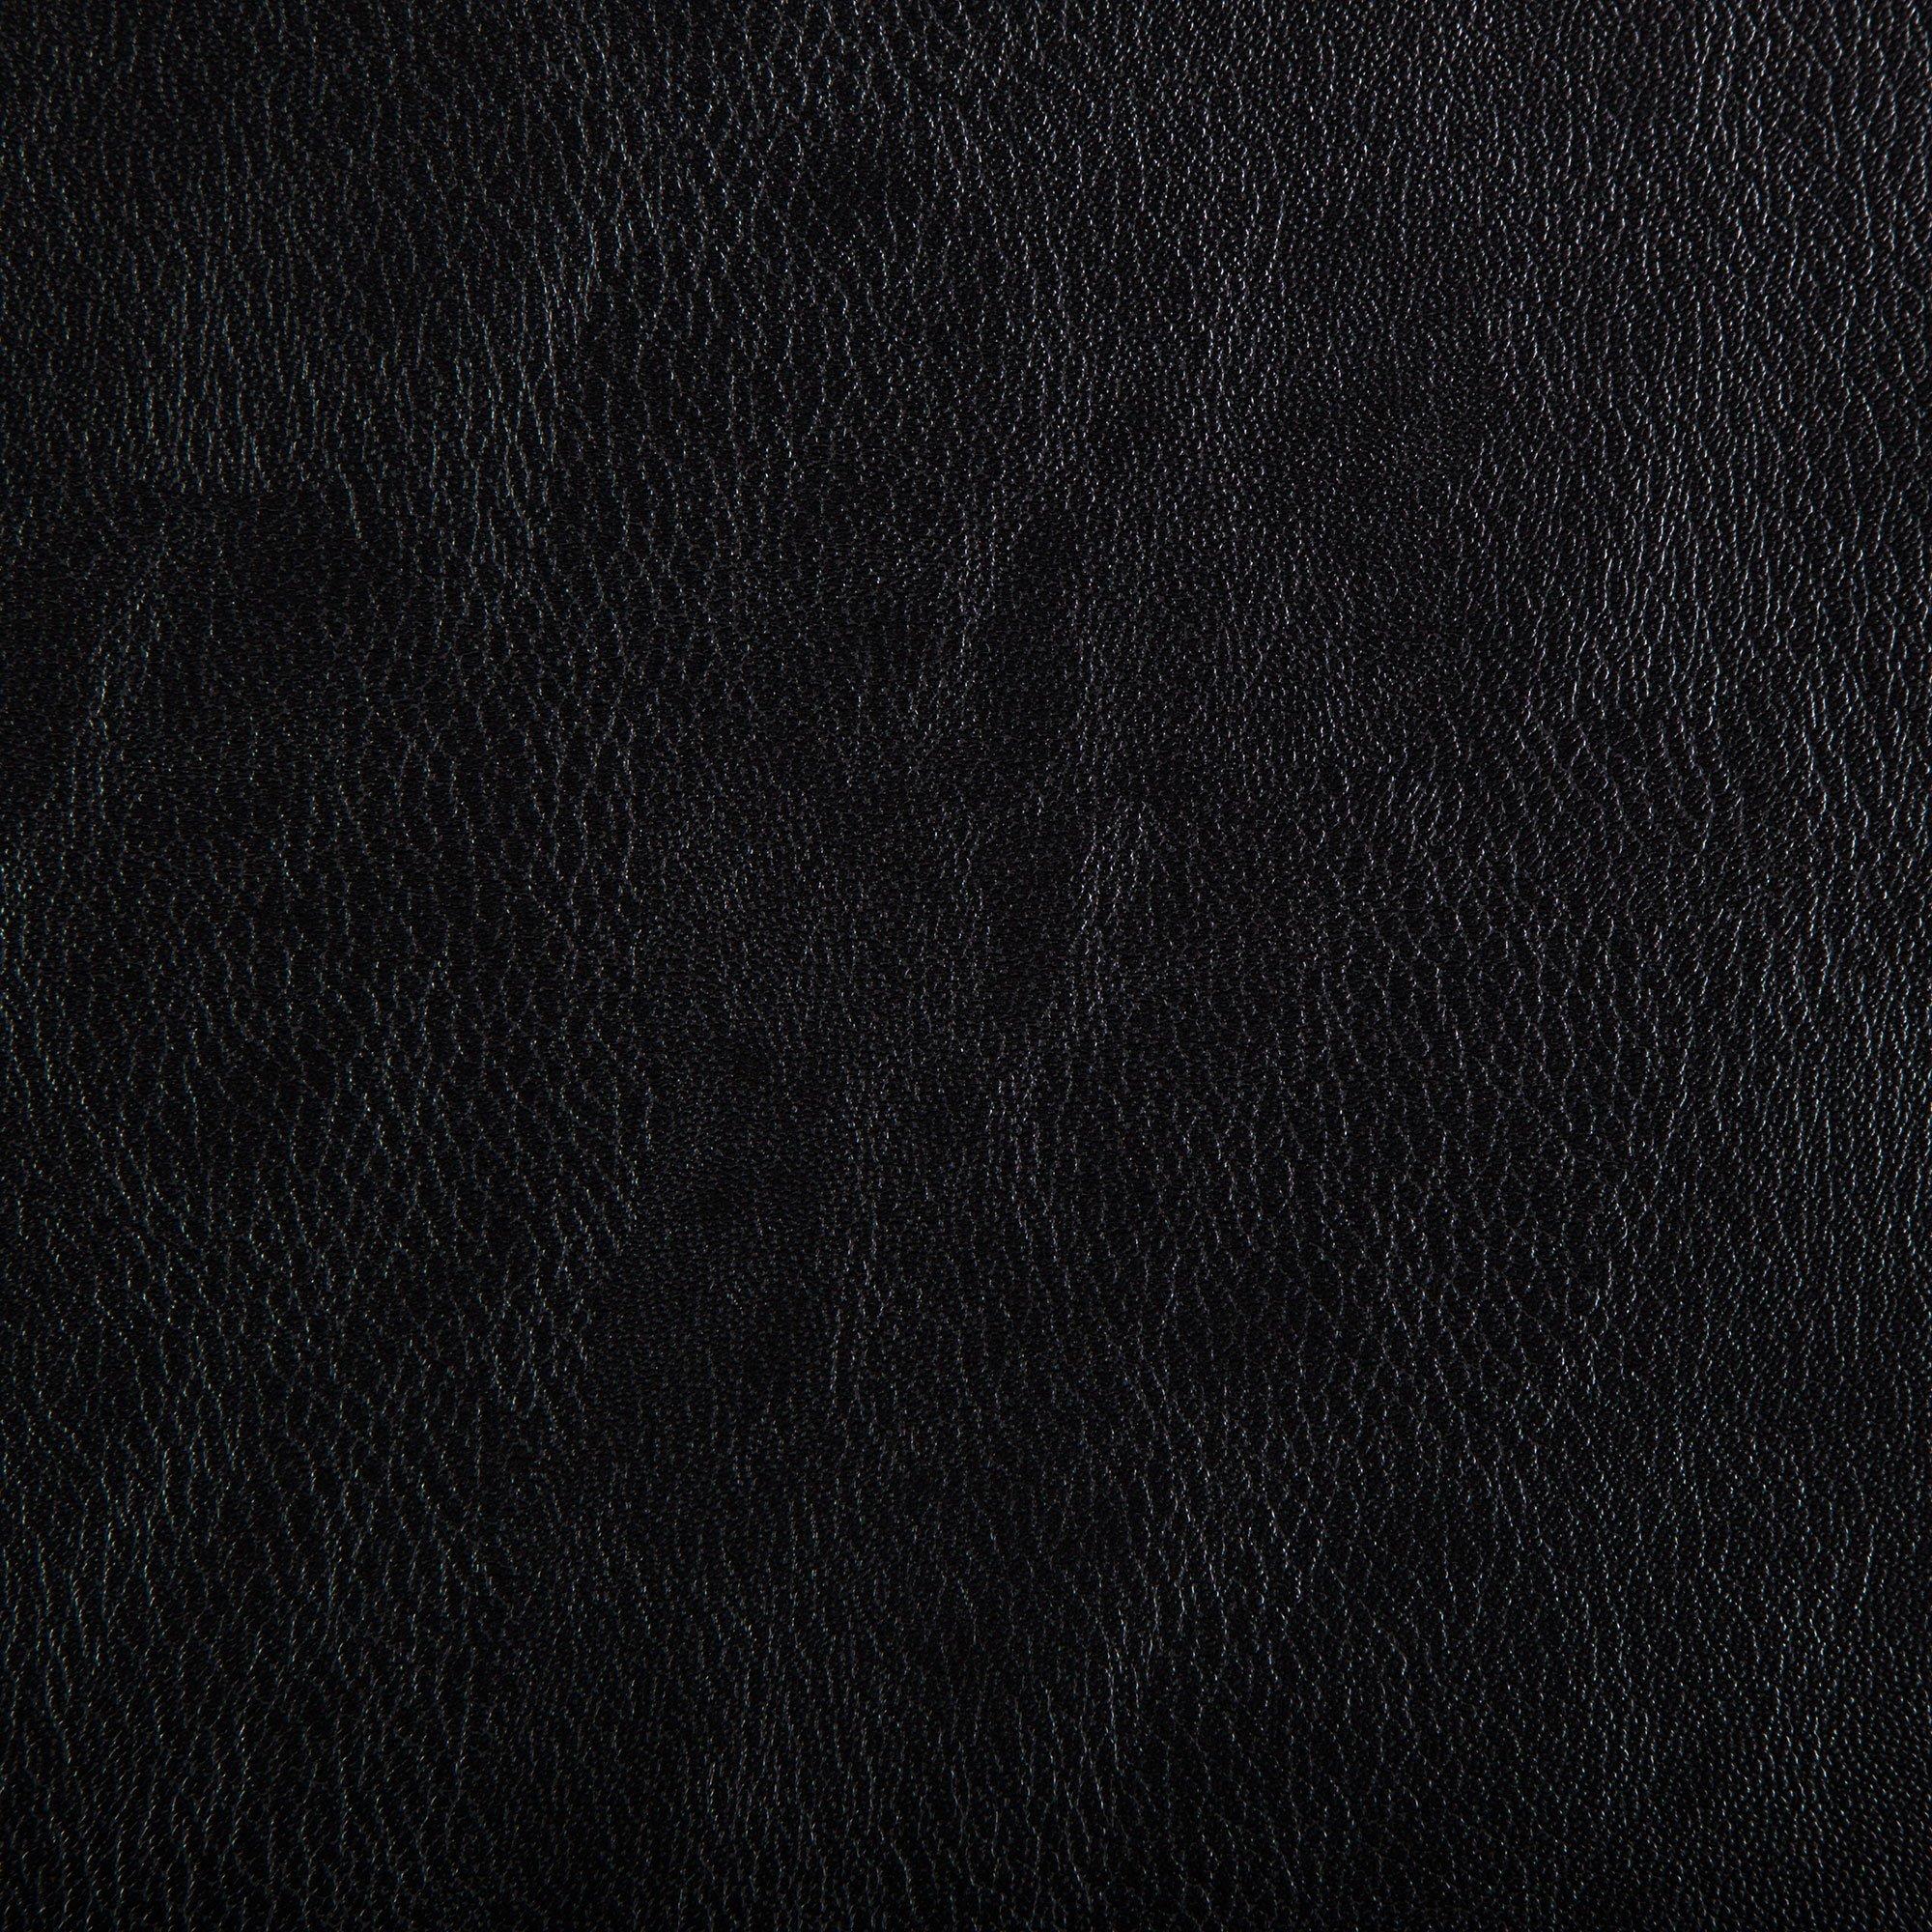 Faux Leather Textured Western Black, Heavyweight Faux Leather Fabric, Home Decor Fabric